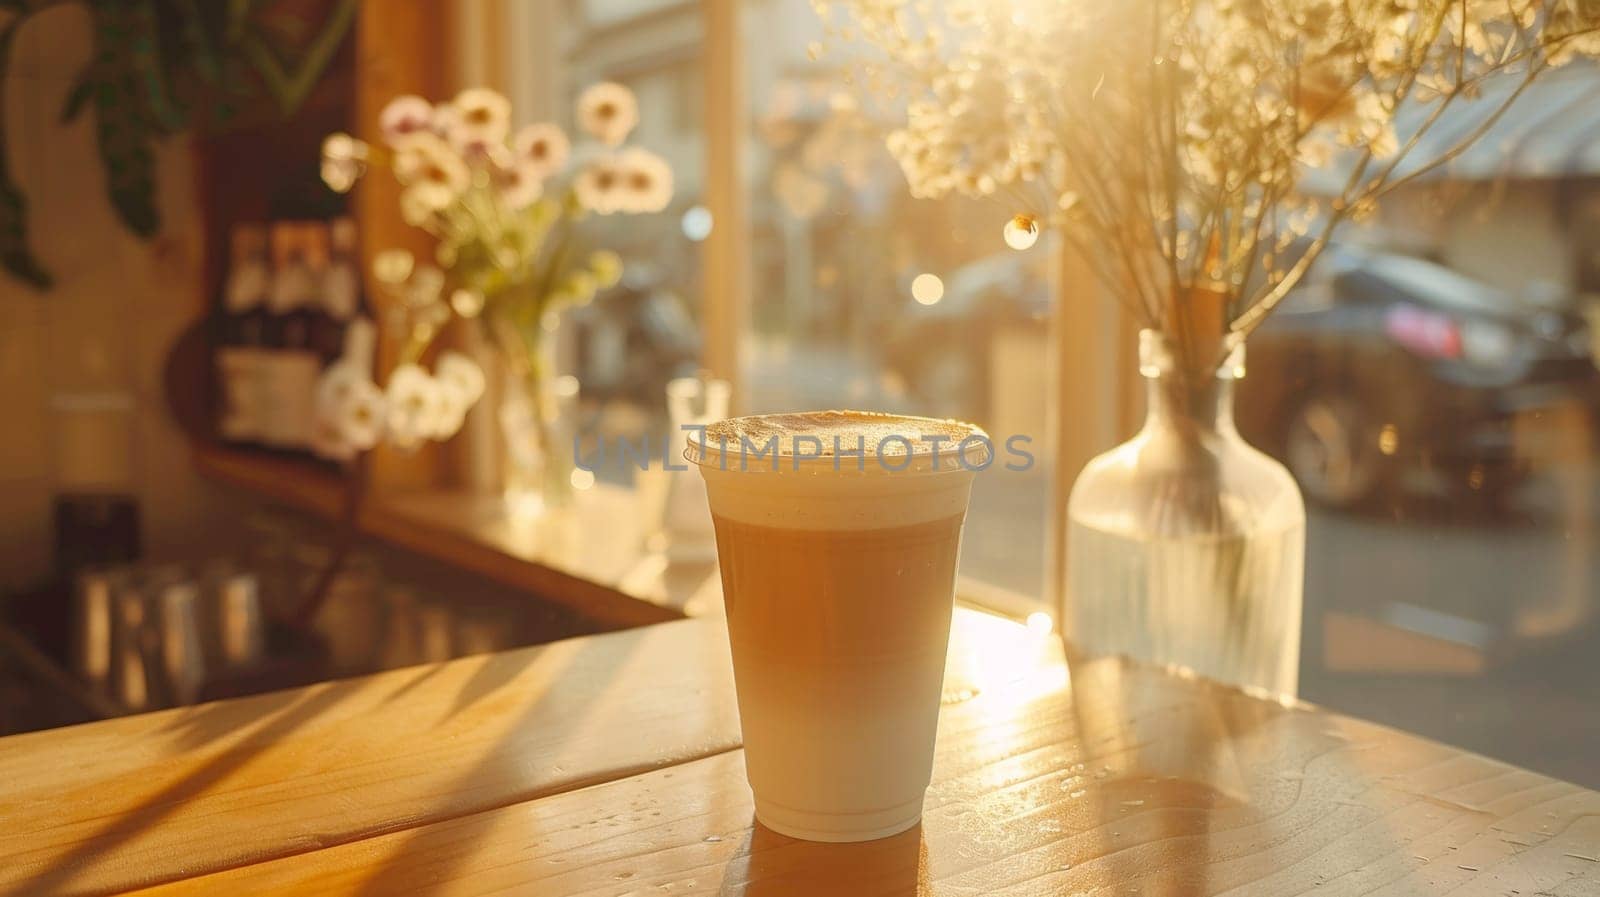 A cup of coffee sitting on a table next to some flowers